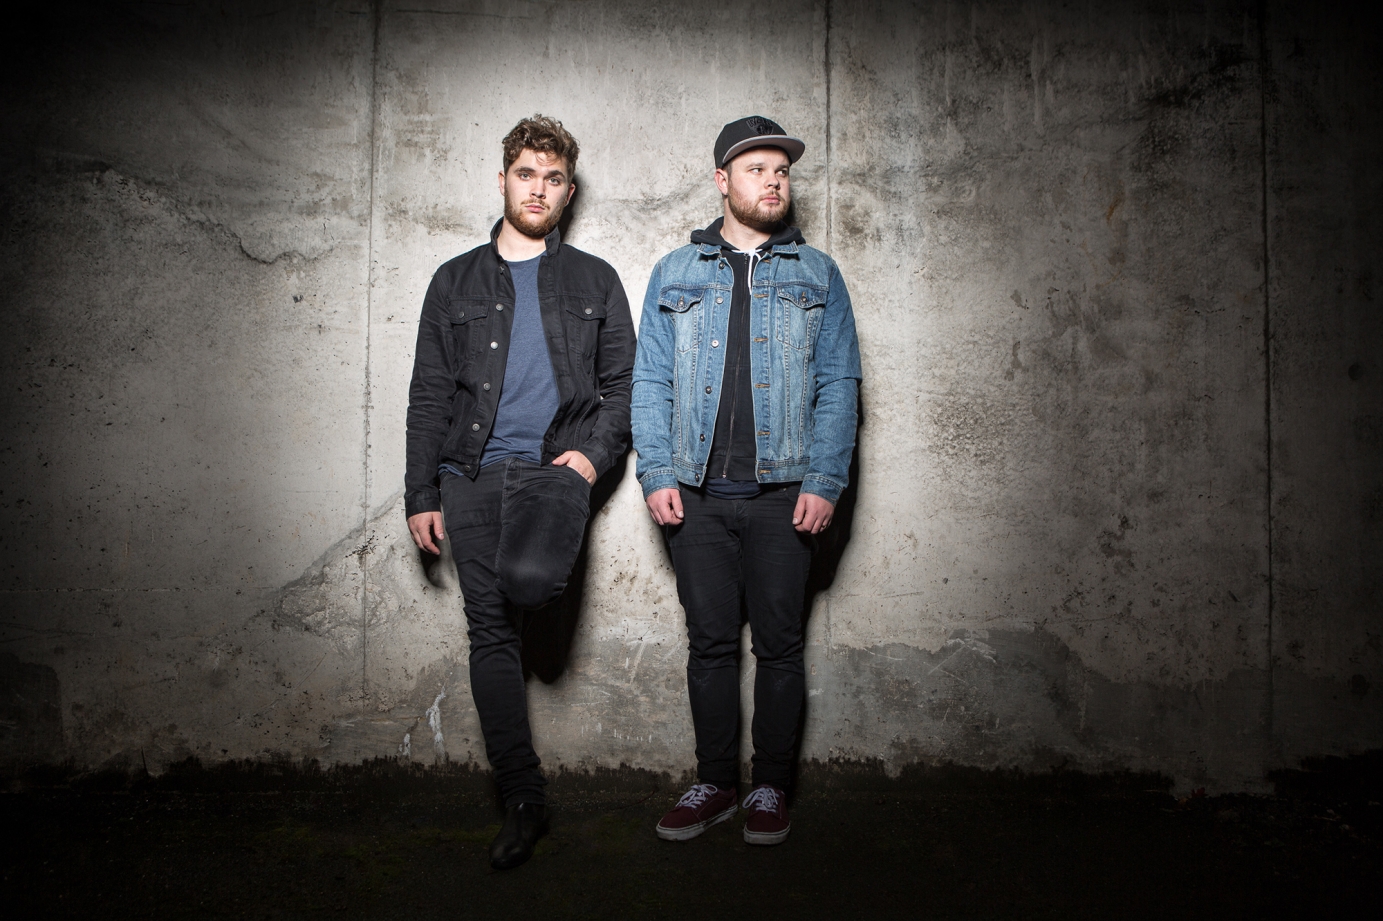 Photography for Royal Blood by Duncan Elliott